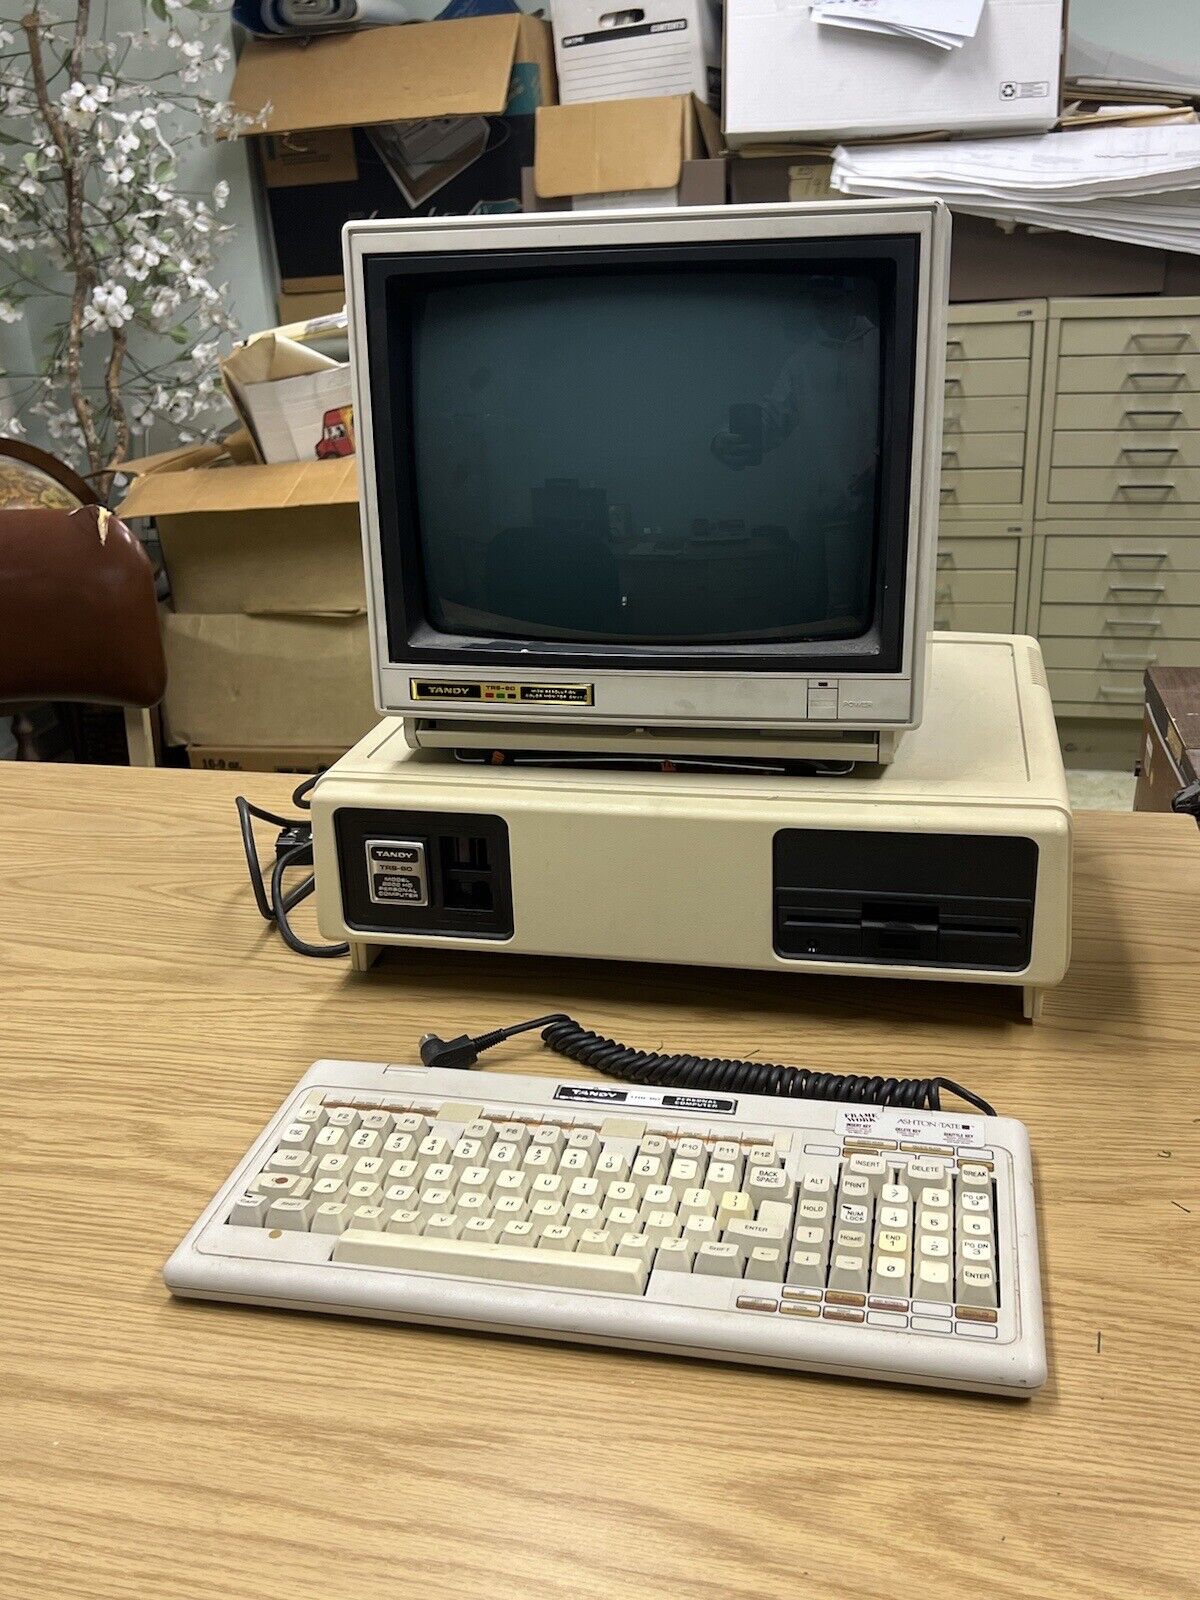 Very Rare TRS-80 Model 26-5112 Personal Computer, Color Monitor, And Keyboard